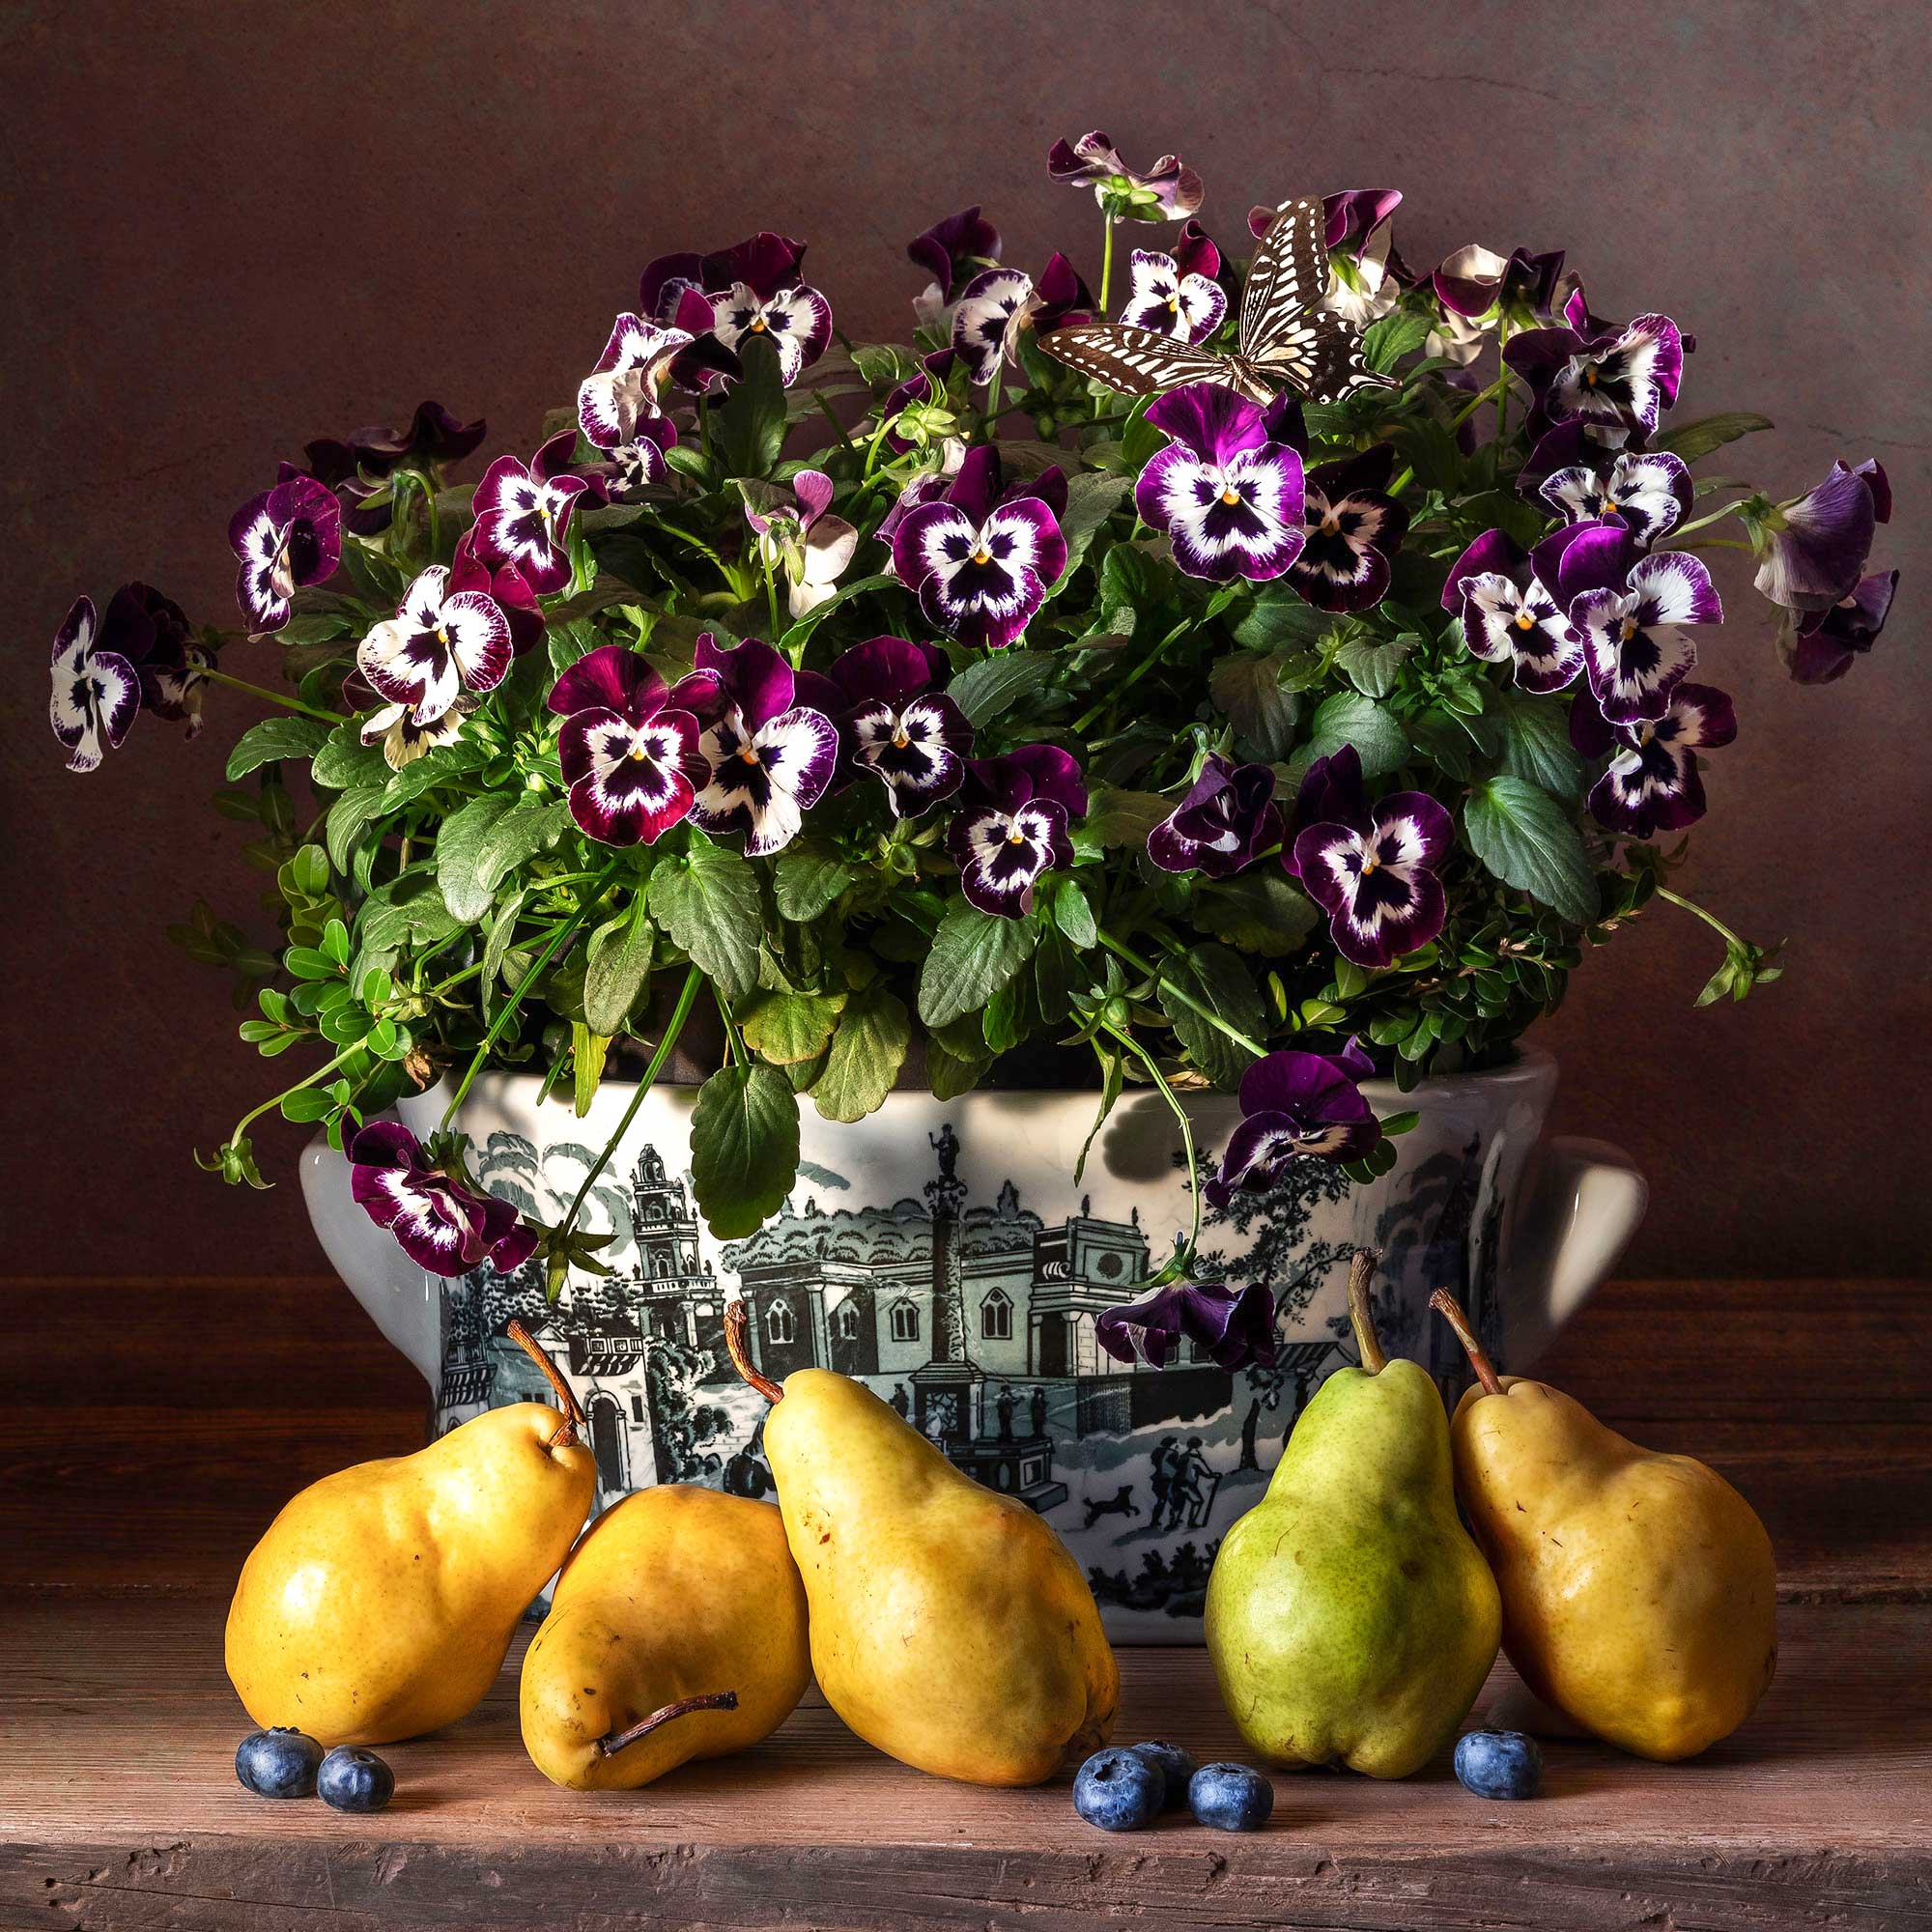 pansies, flowers, pears, still life photography, inspired by old masters, Слуцкая Яна